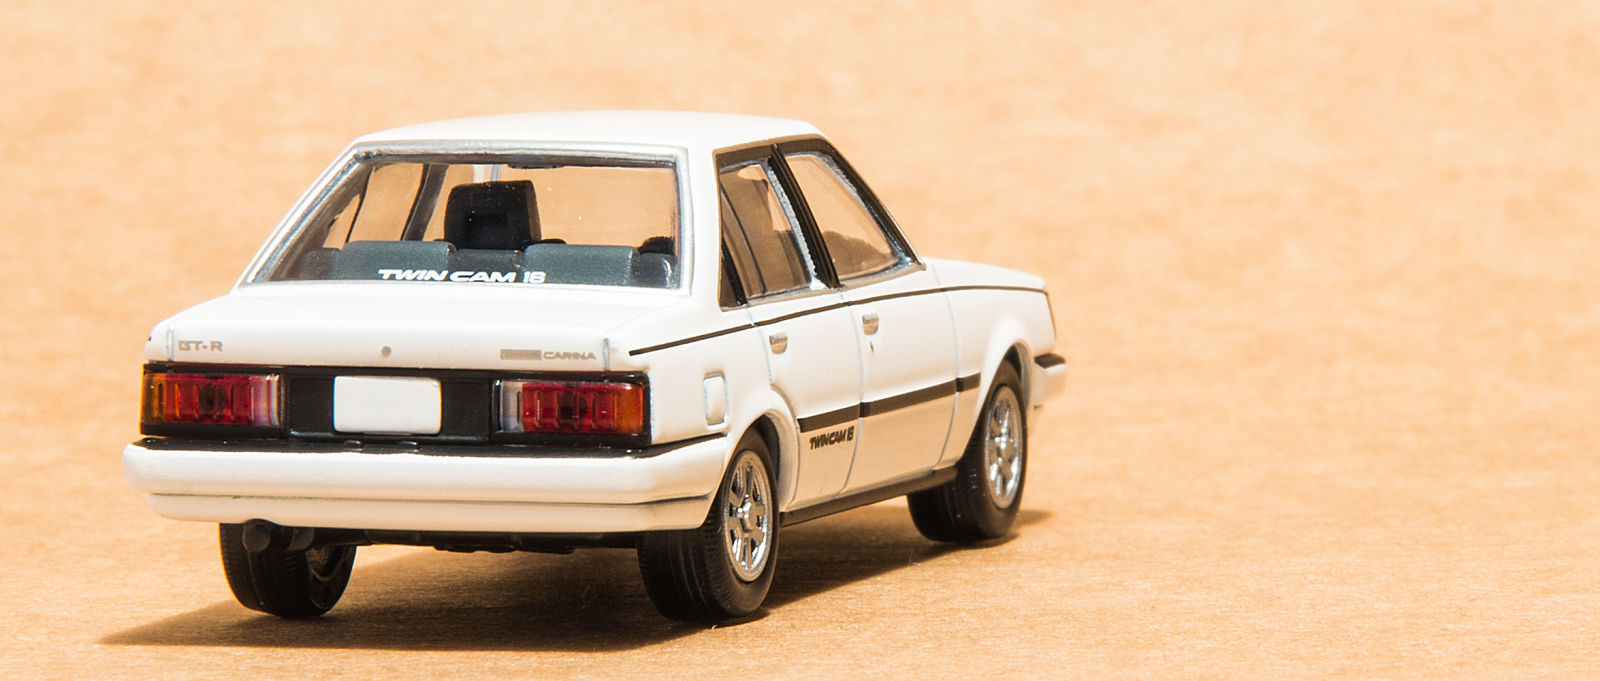 Illustration for article titled Review: TLV-N Toyota Carina 1600 GT-R